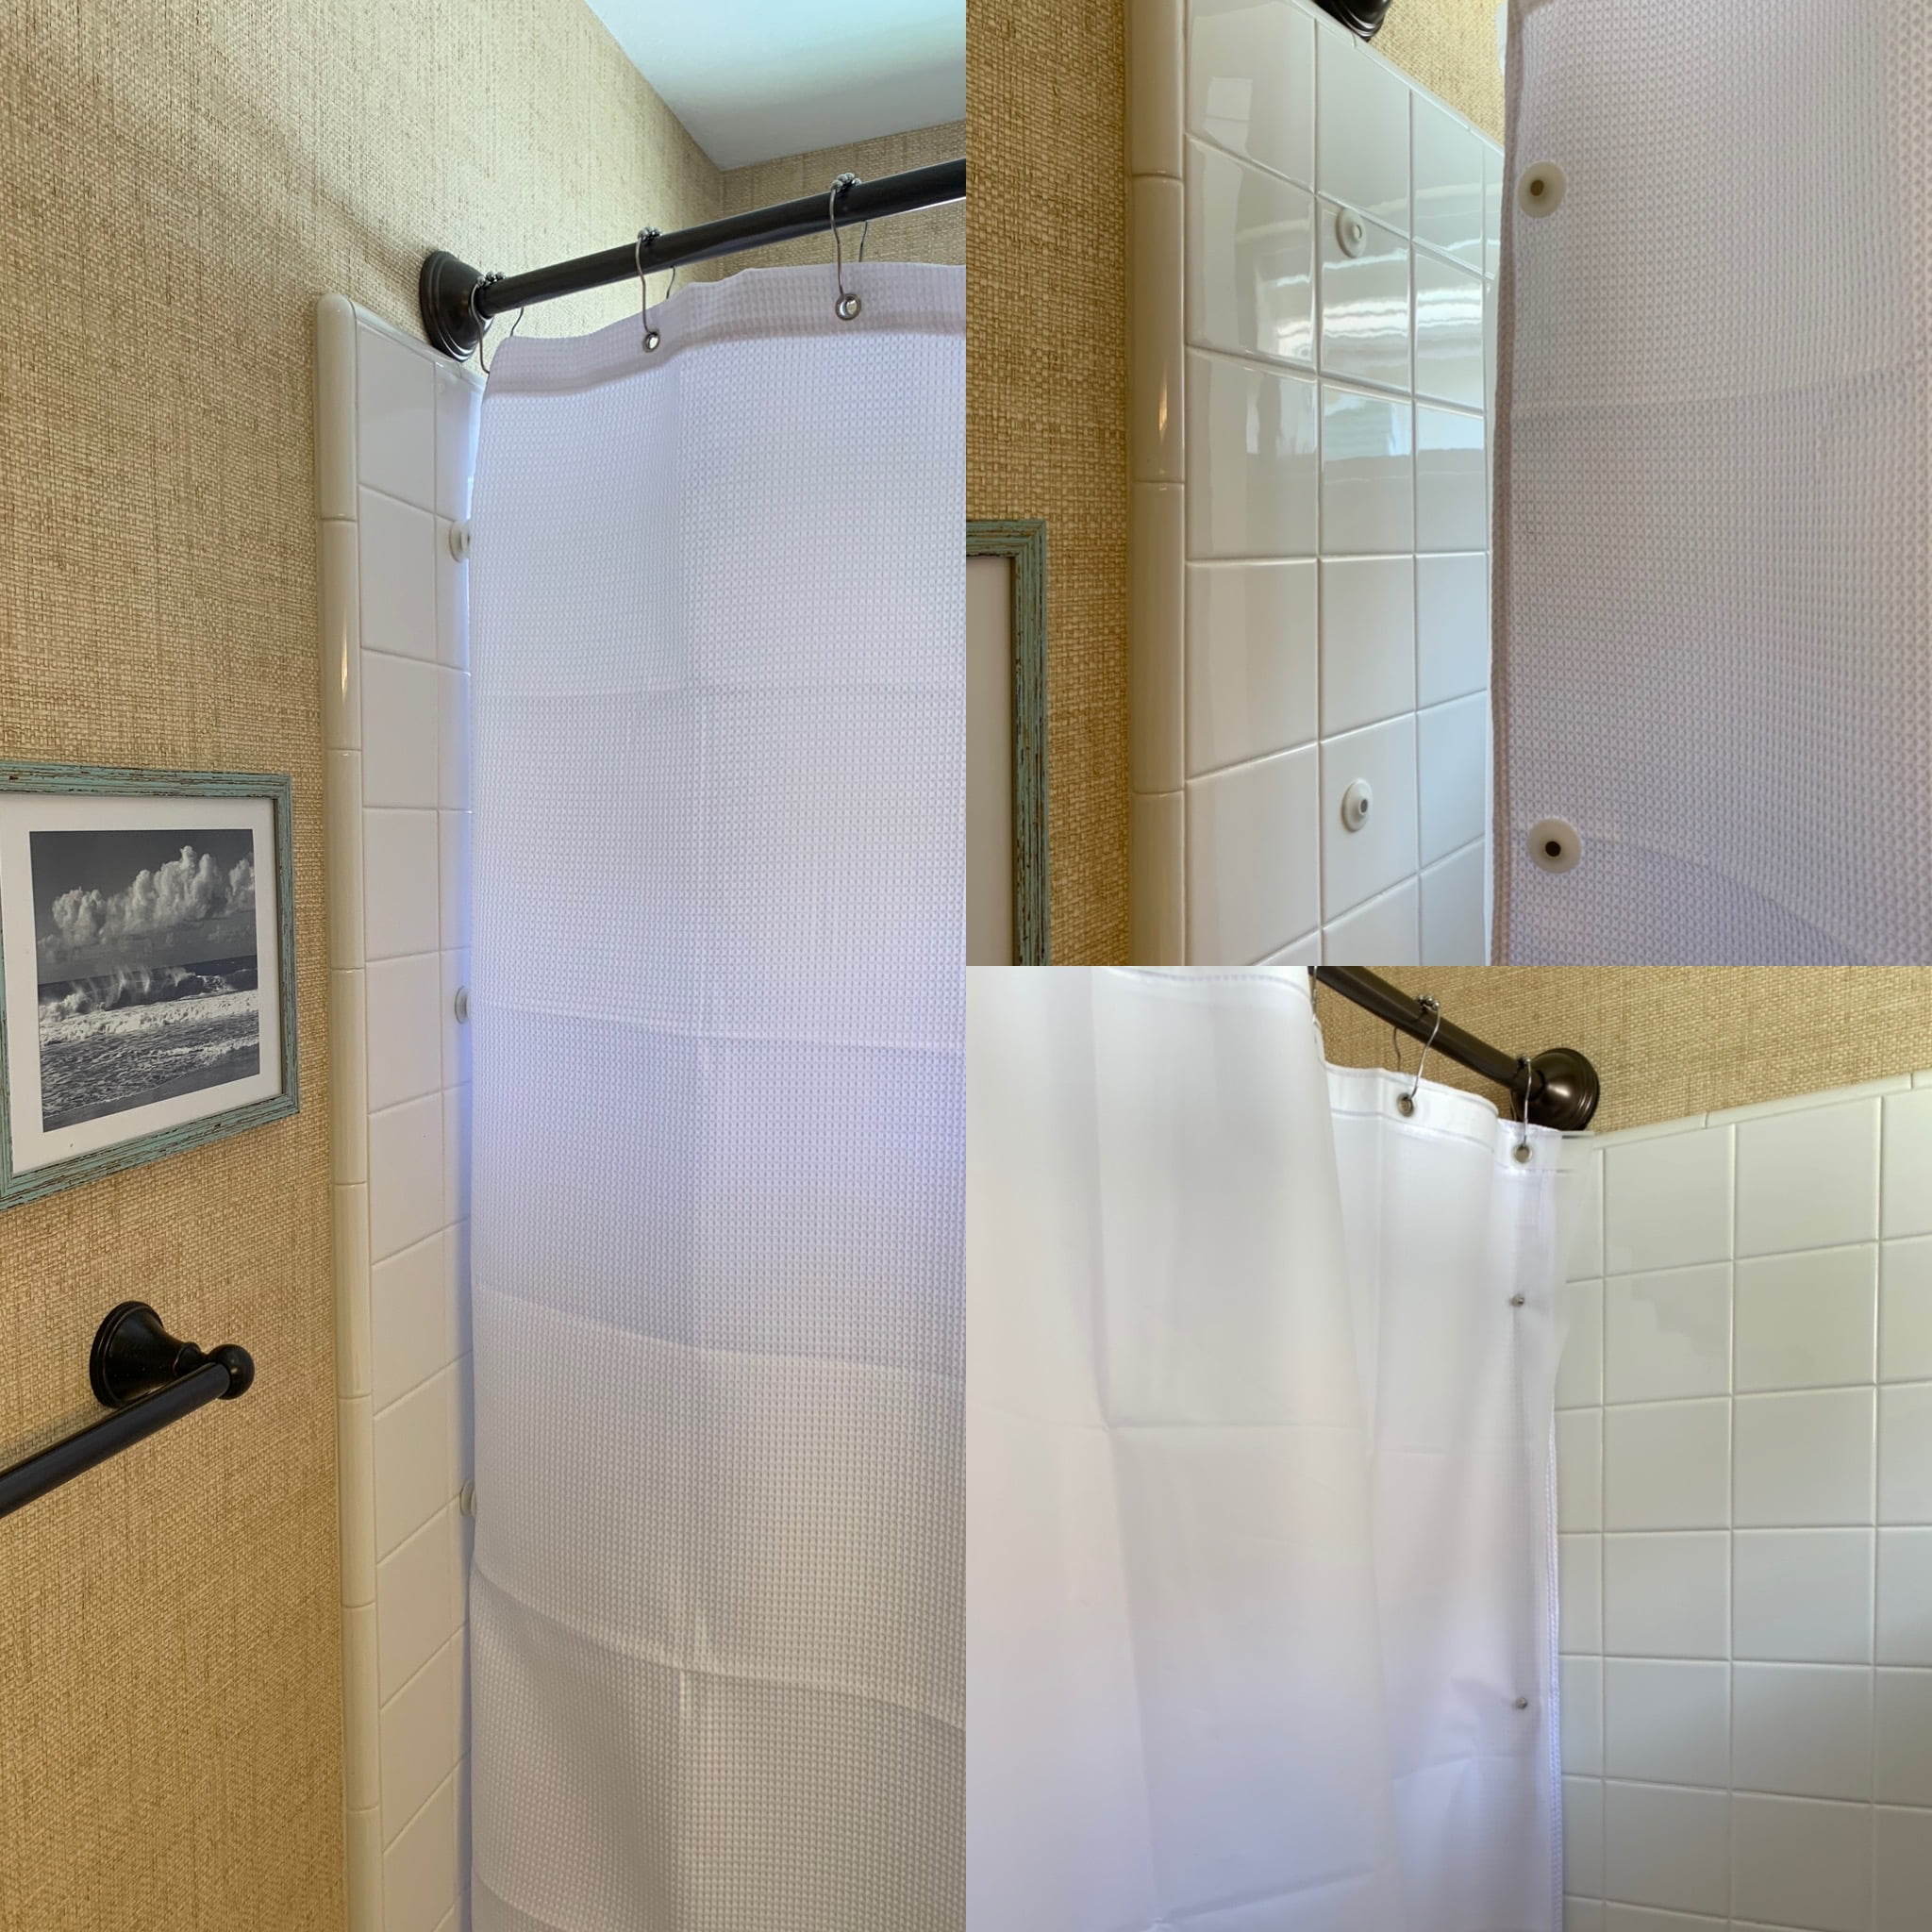 Shower Curtain Magnets (New Model) Keep Your Shower Curtain Closed and  Tight to